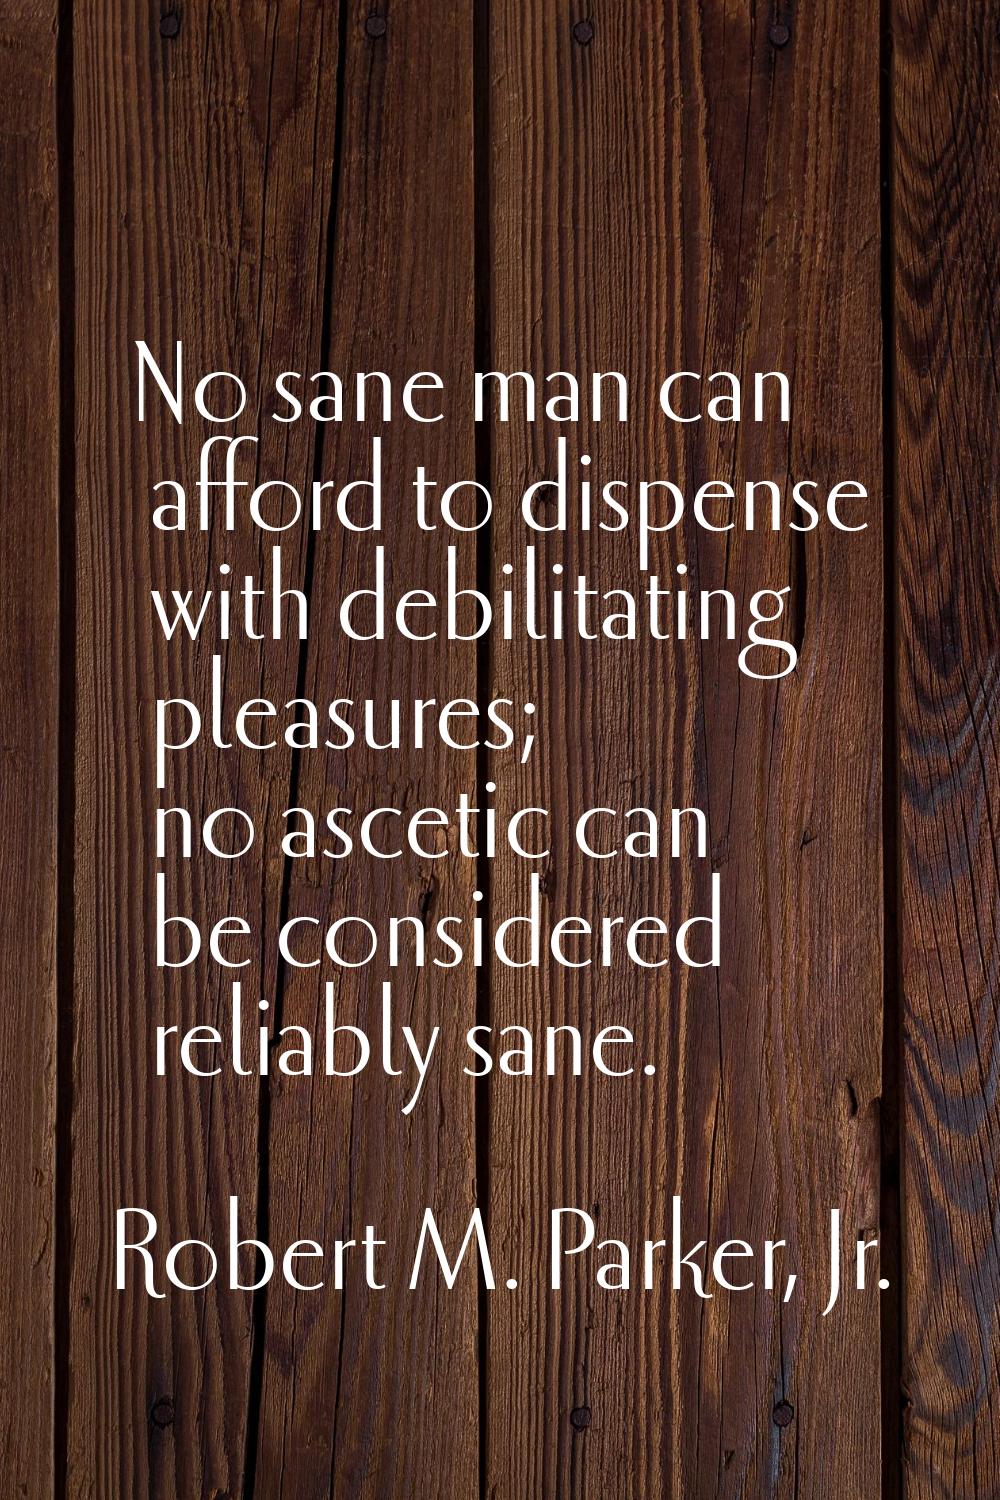 No sane man can afford to dispense with debilitating pleasures; no ascetic can be considered reliab